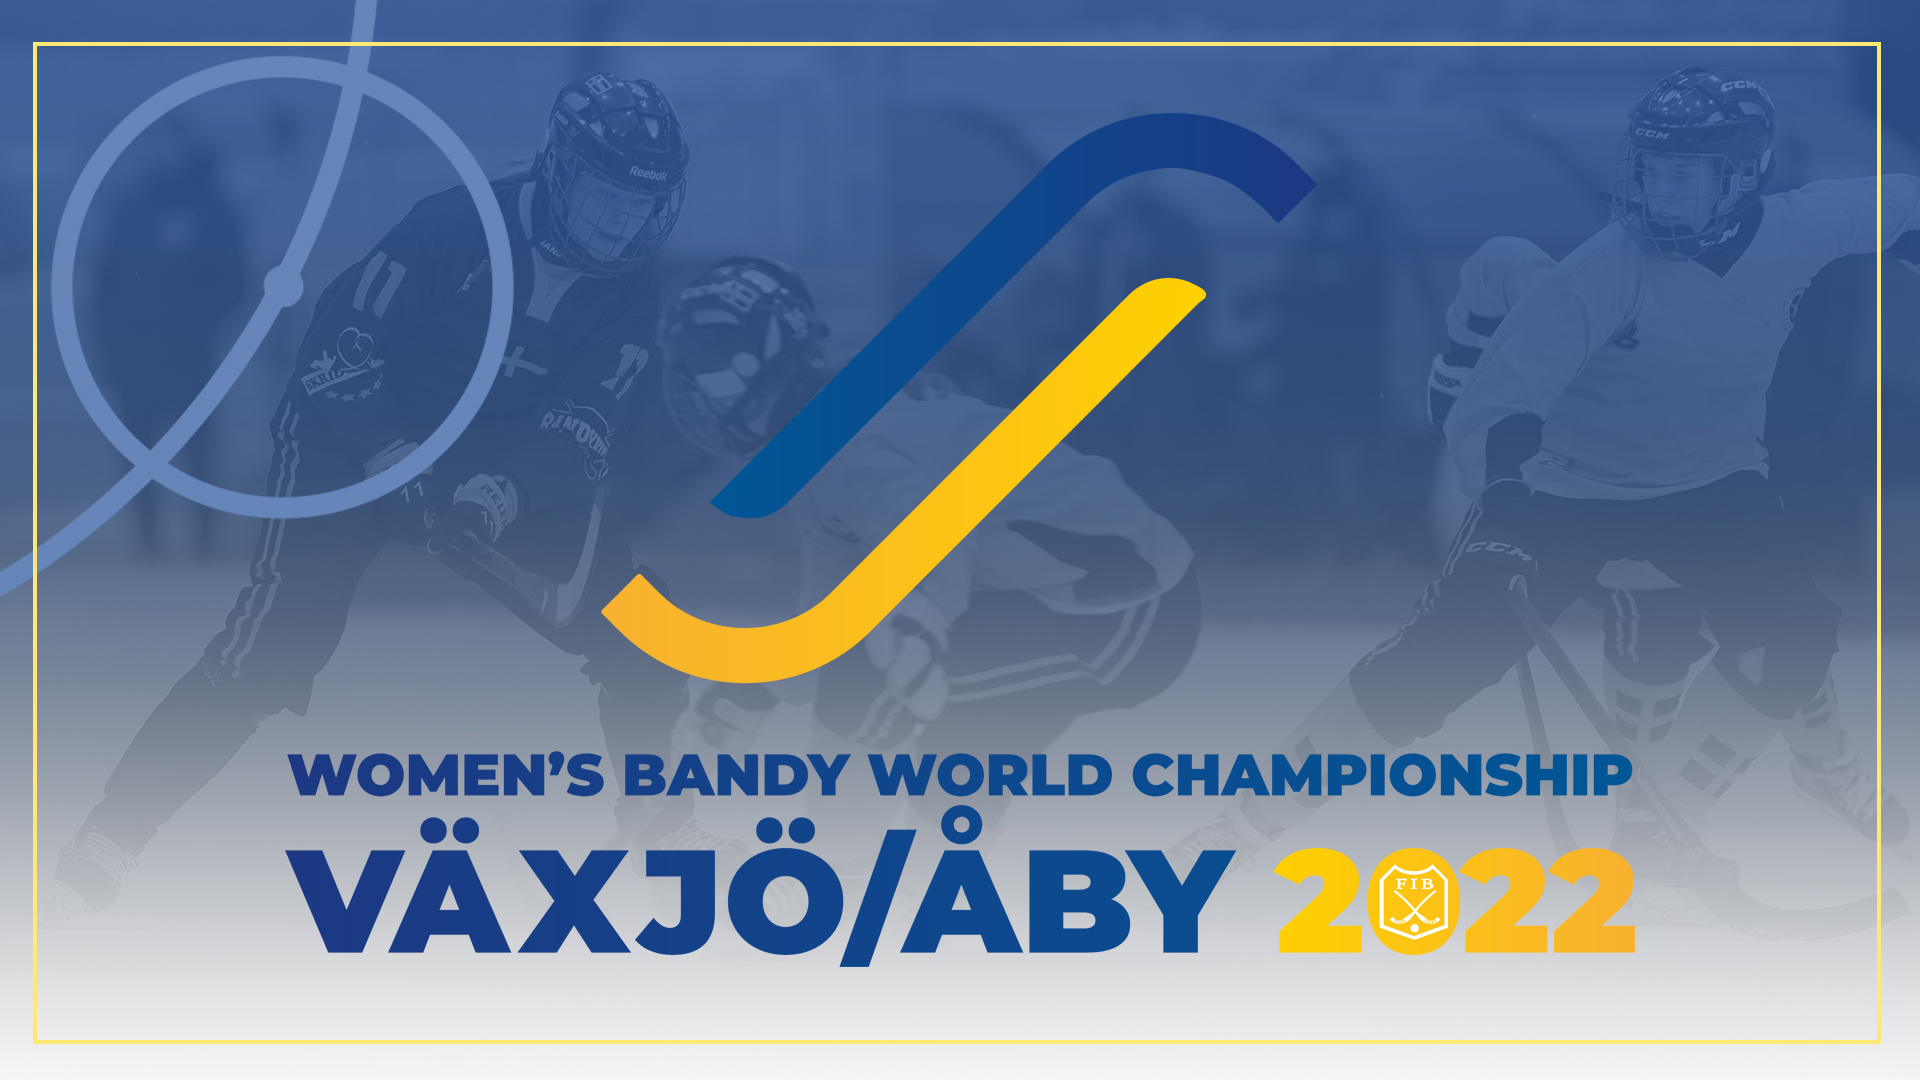 Sweden have recorded back-to-back wins in Pool A ©Swedish Bandy Association